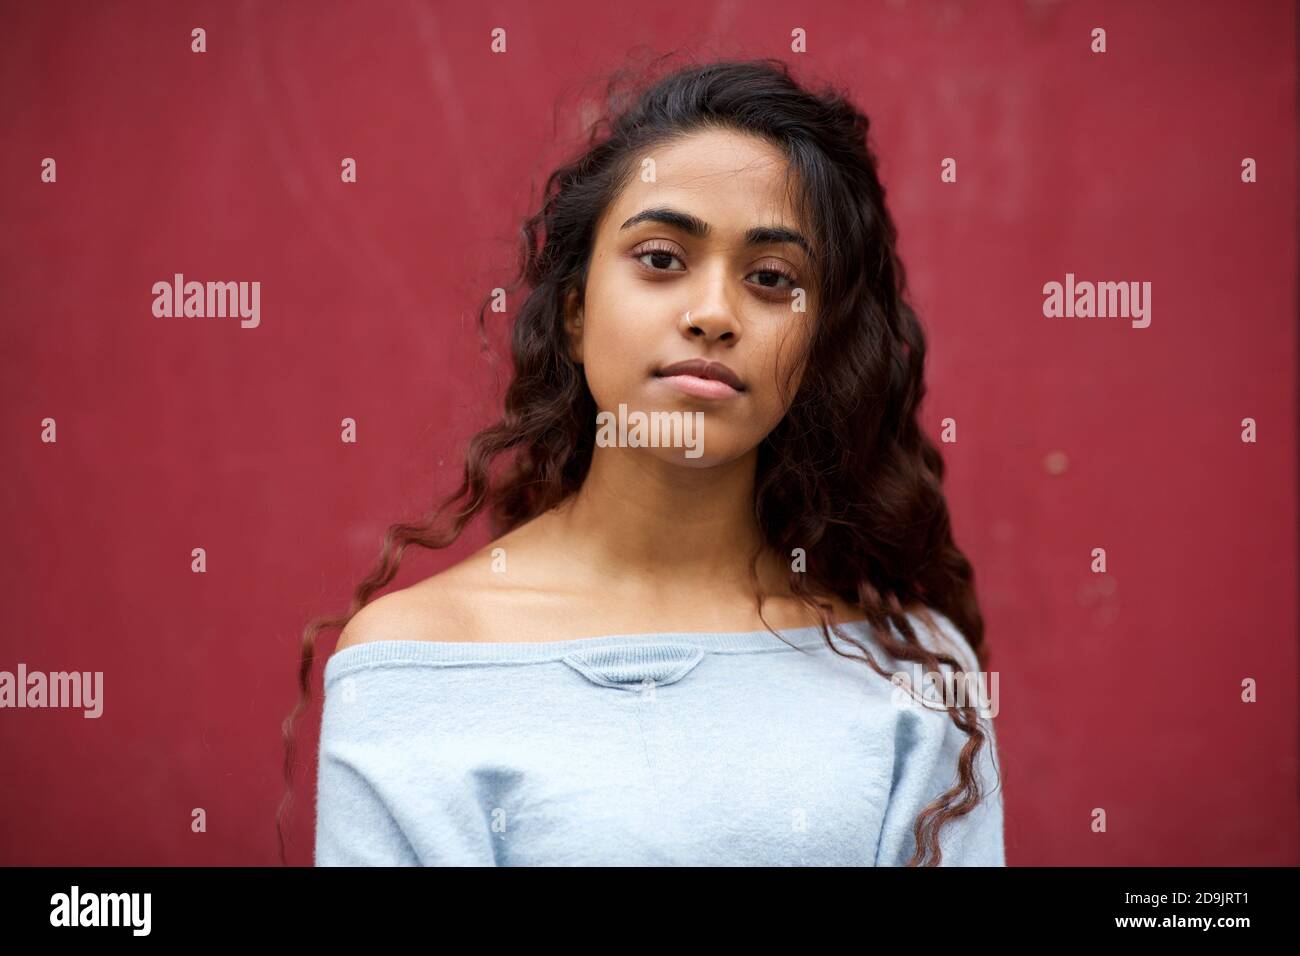 Close up portrait beautiful young Indian woman with long hair against red background Stock Photo